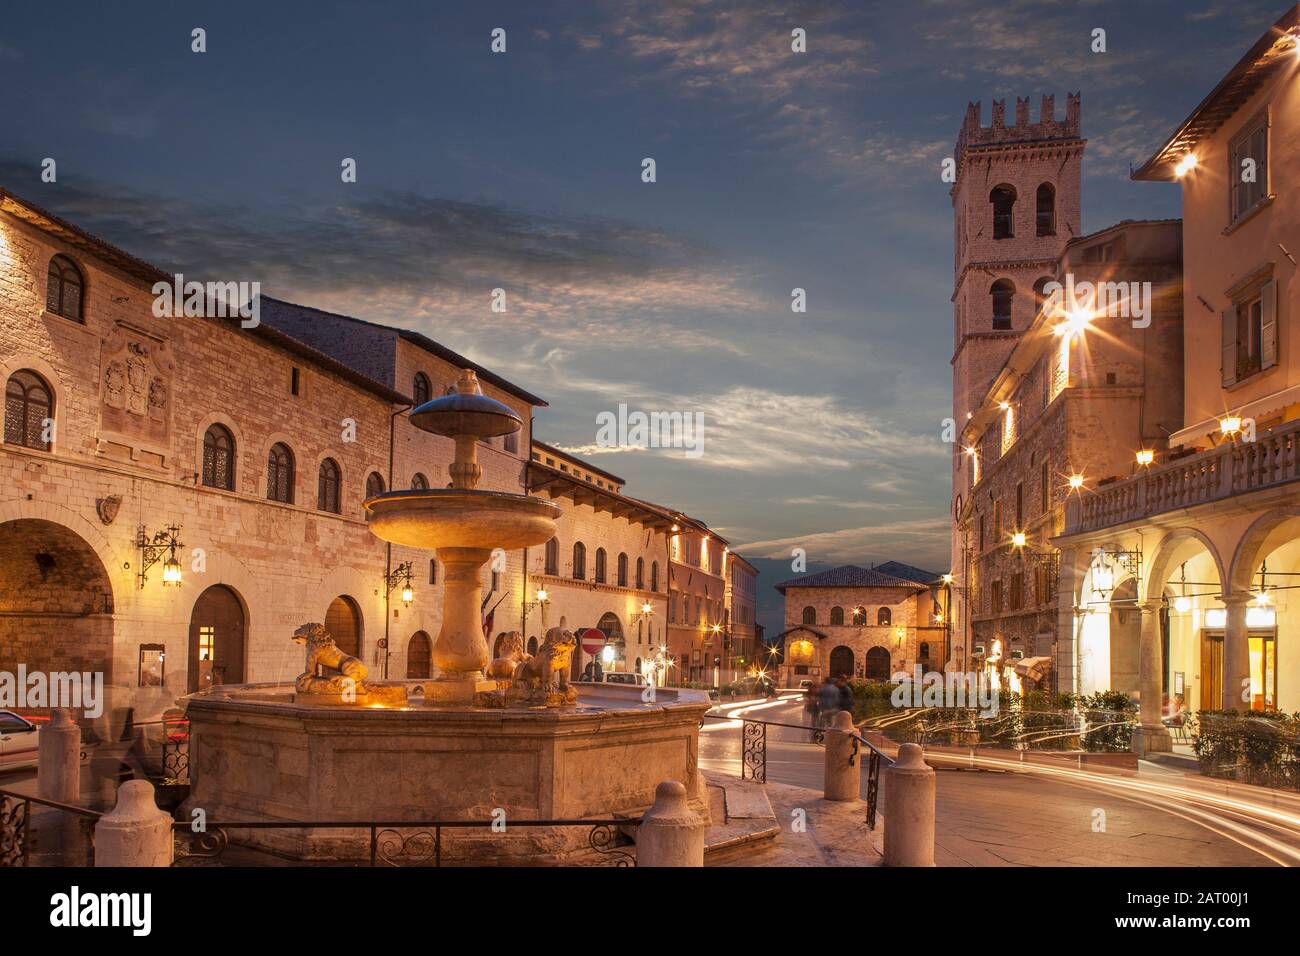 Fountain in Piazza del Comune at sunset in Assisi, Italy Stock Photo